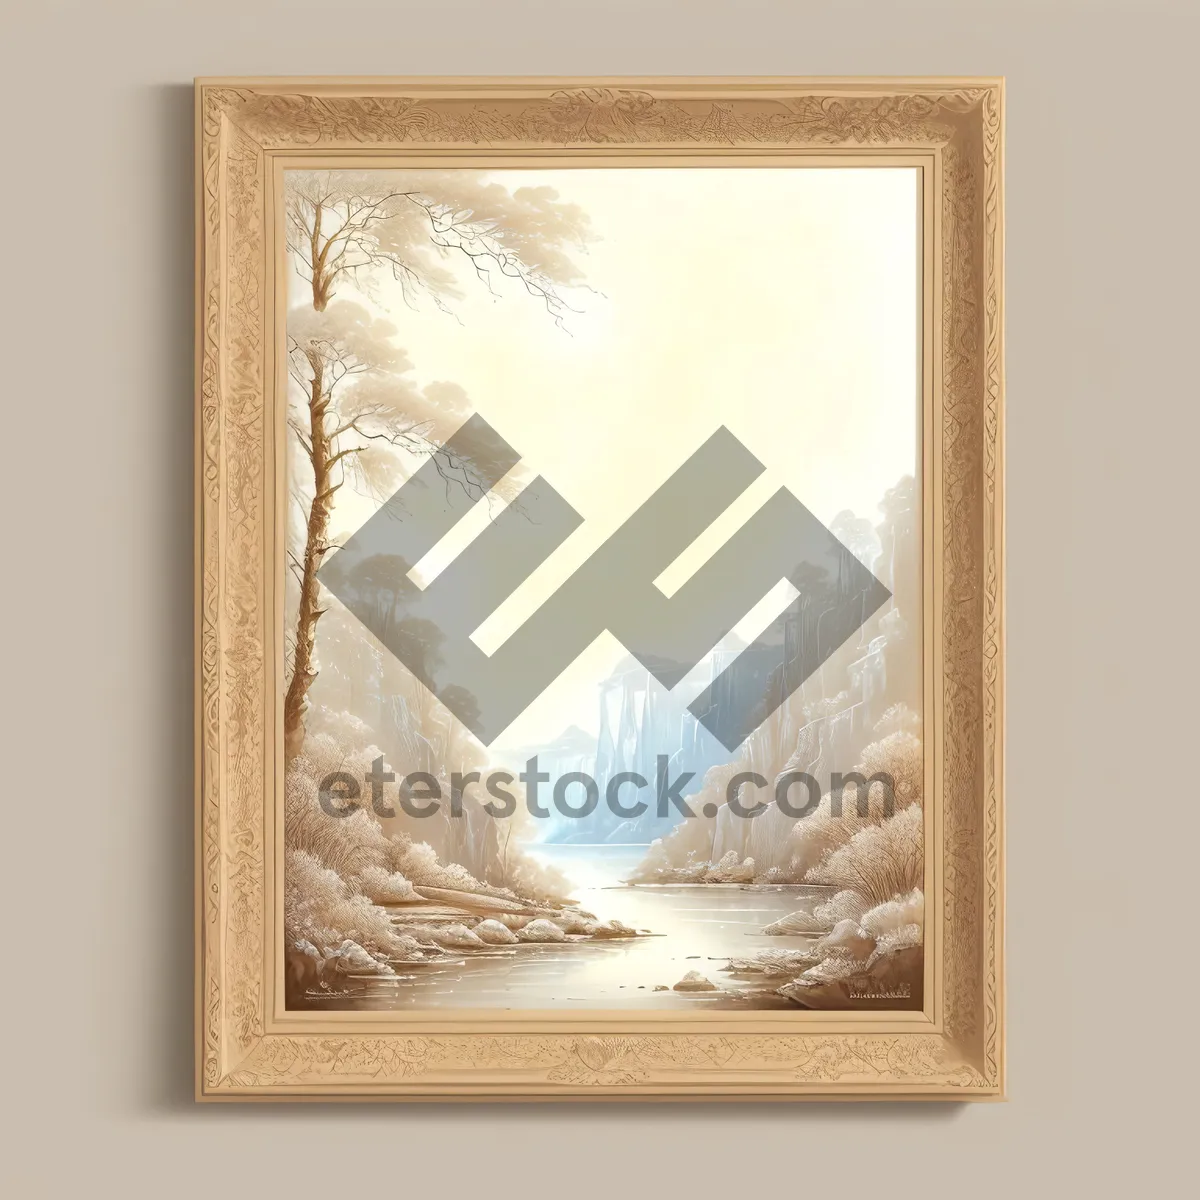 Picture of Antique Wooden Frame with Vintage Photograph